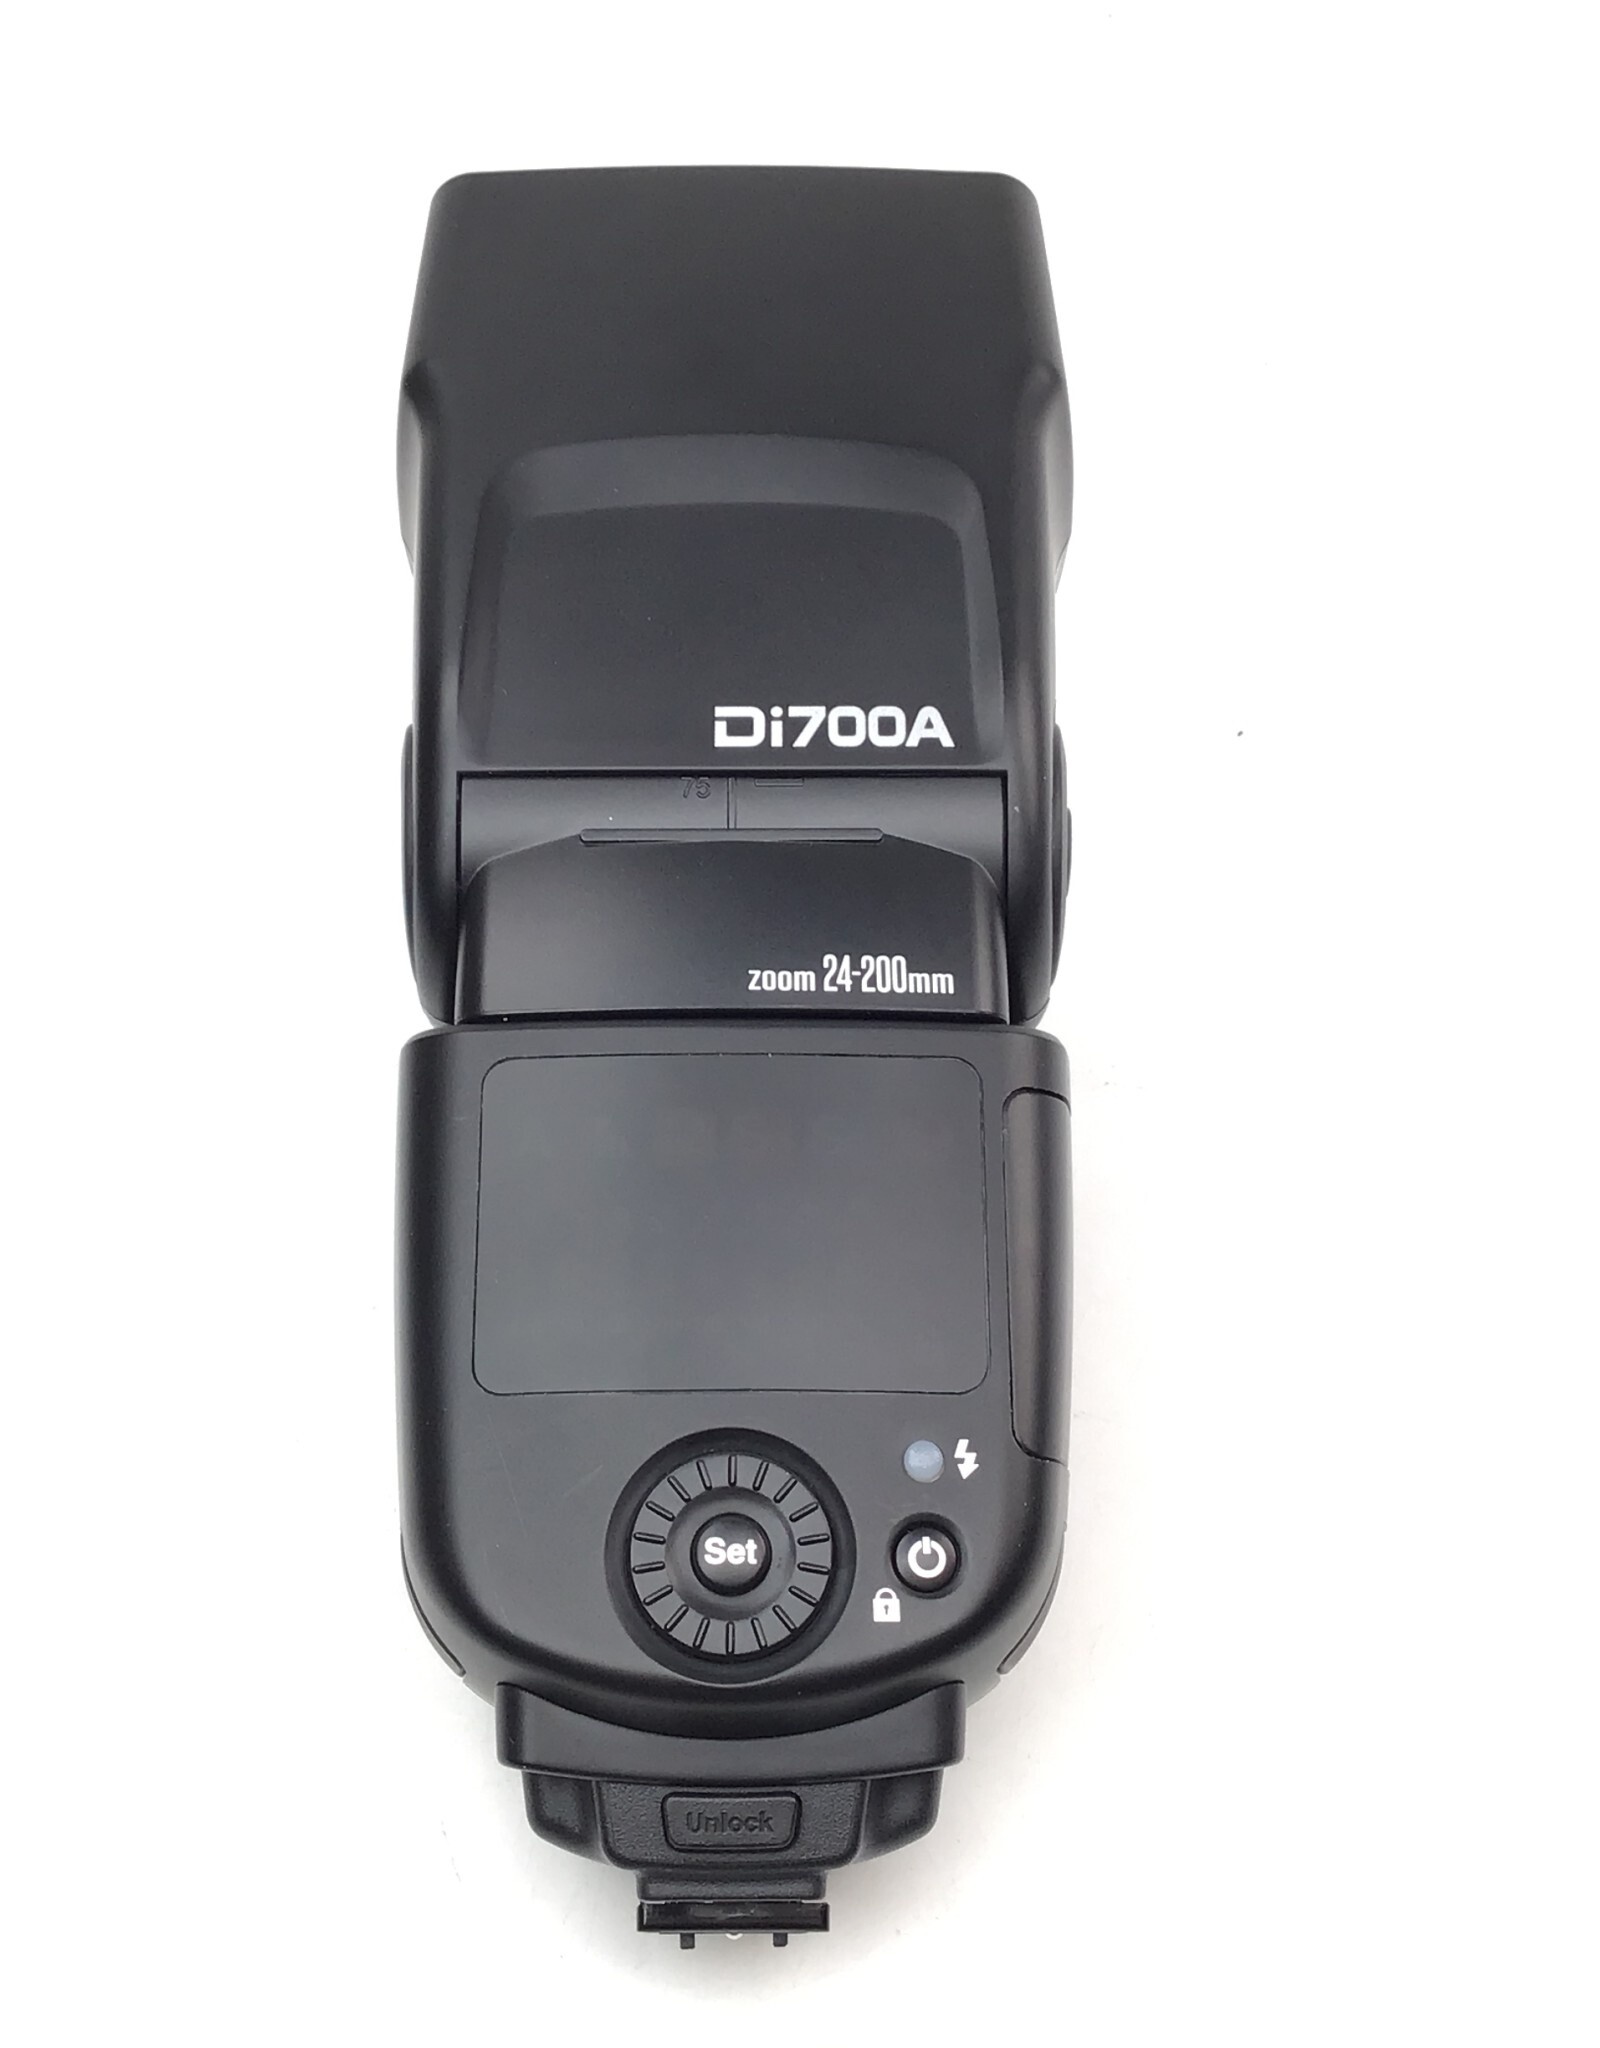 Nissin Di700A Flash for Sony Used Good